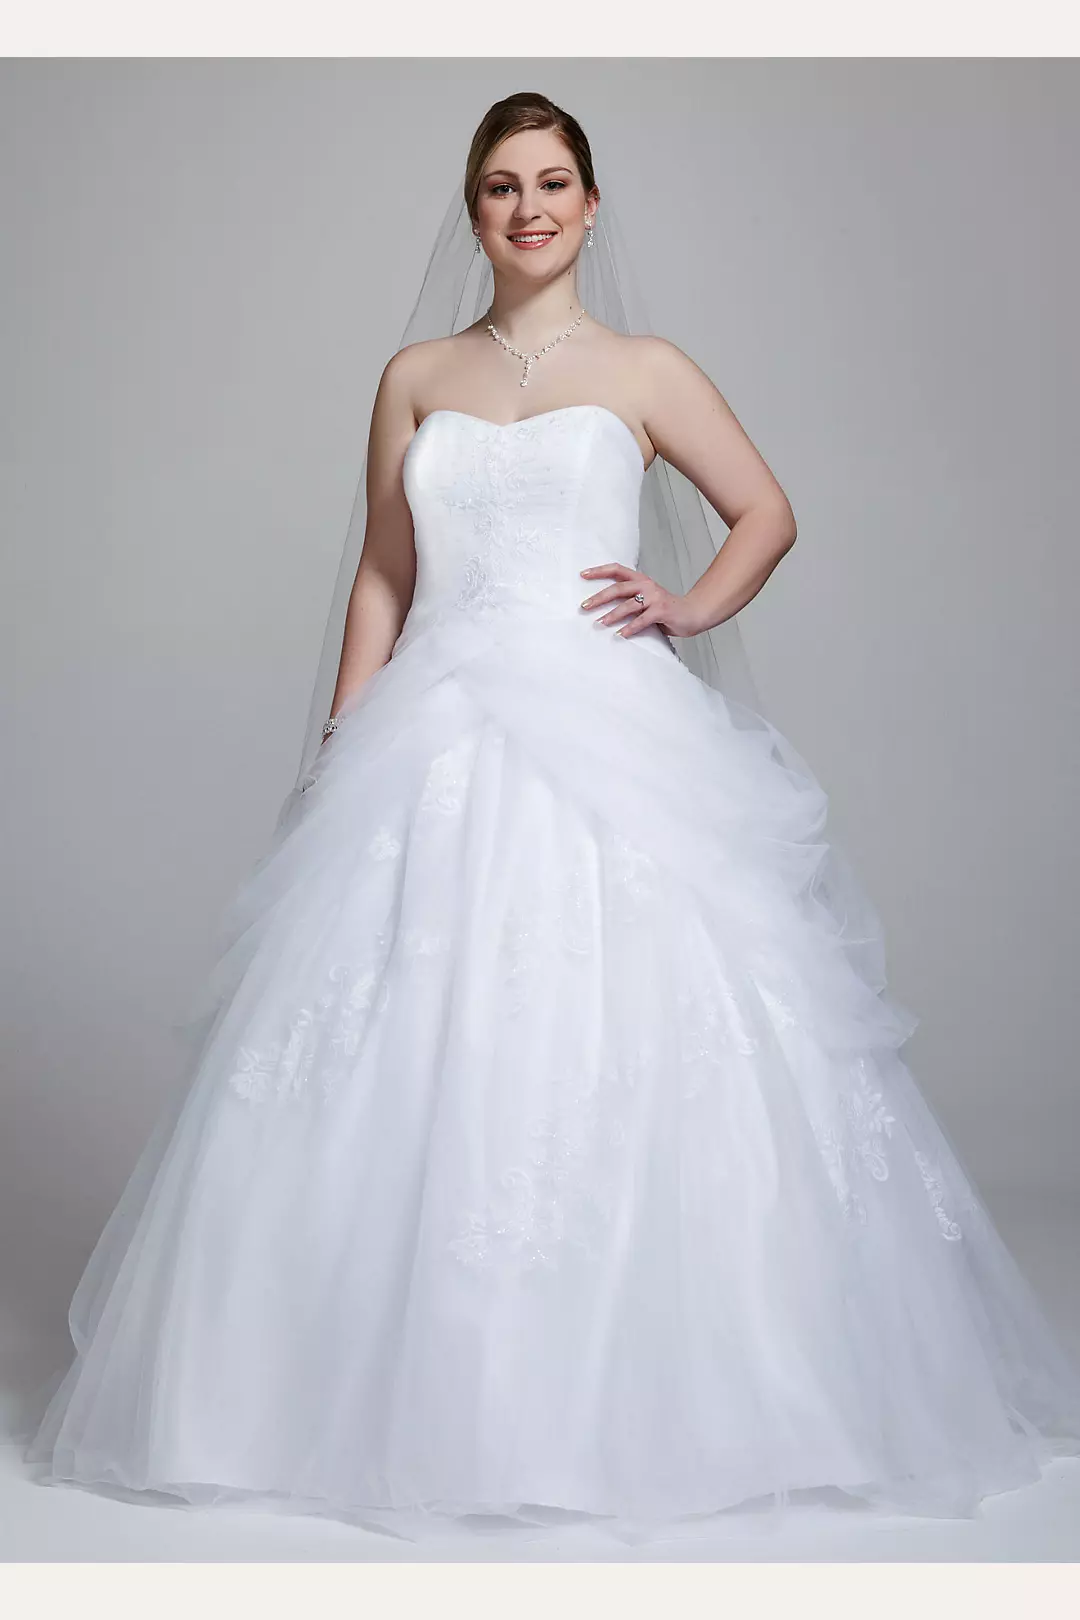 Tulle Wedding Dress with Lace-Up Back with Draping Image